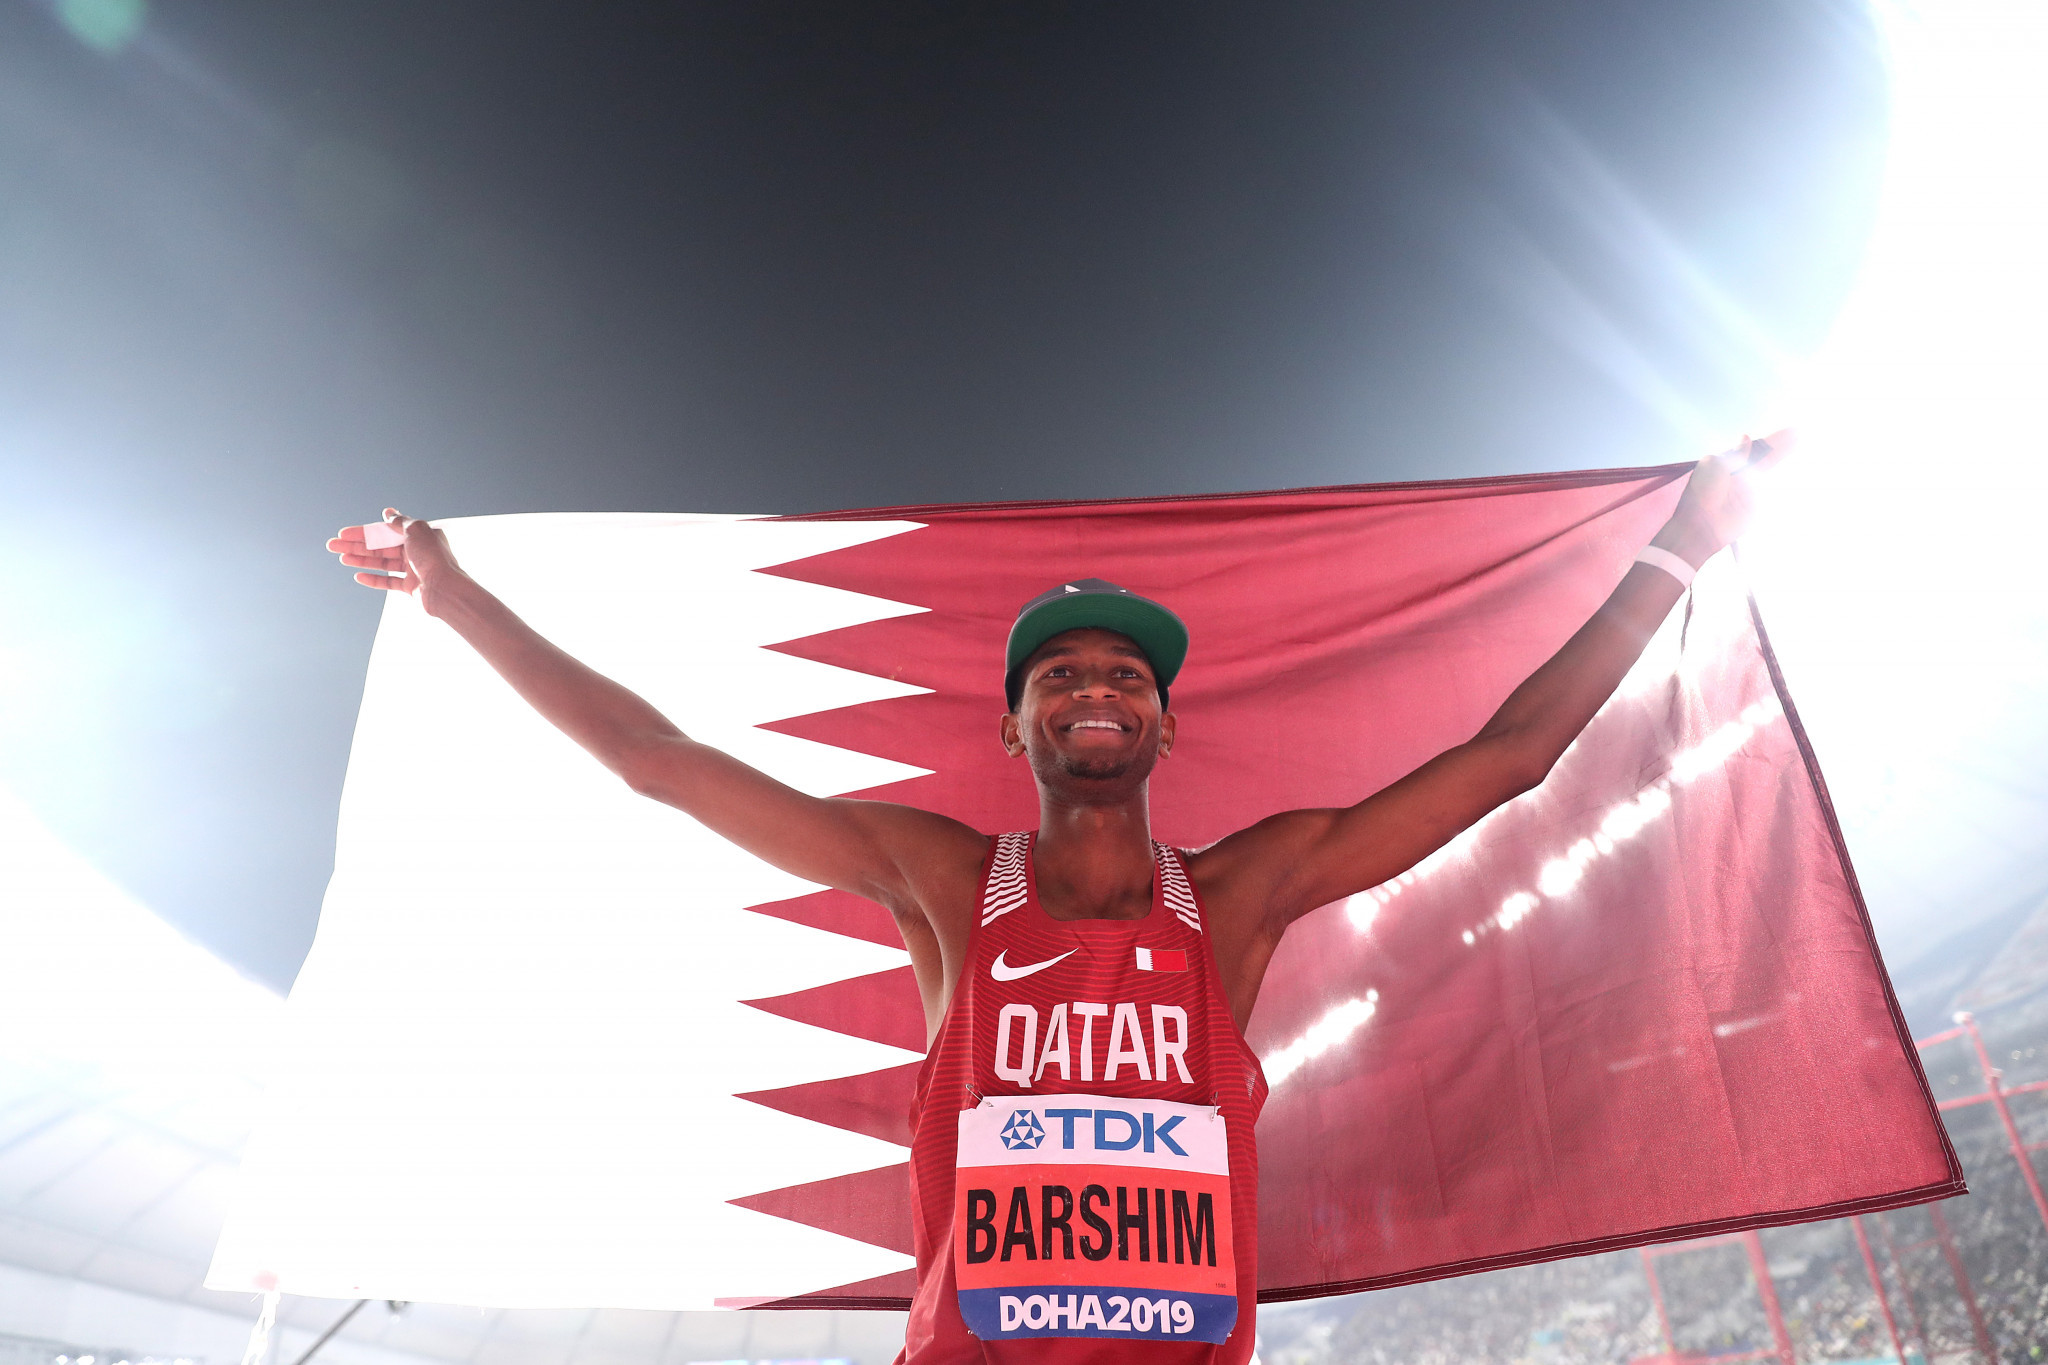 High jump star Barshim named male athlete of the year by Qatar Olympic Committee